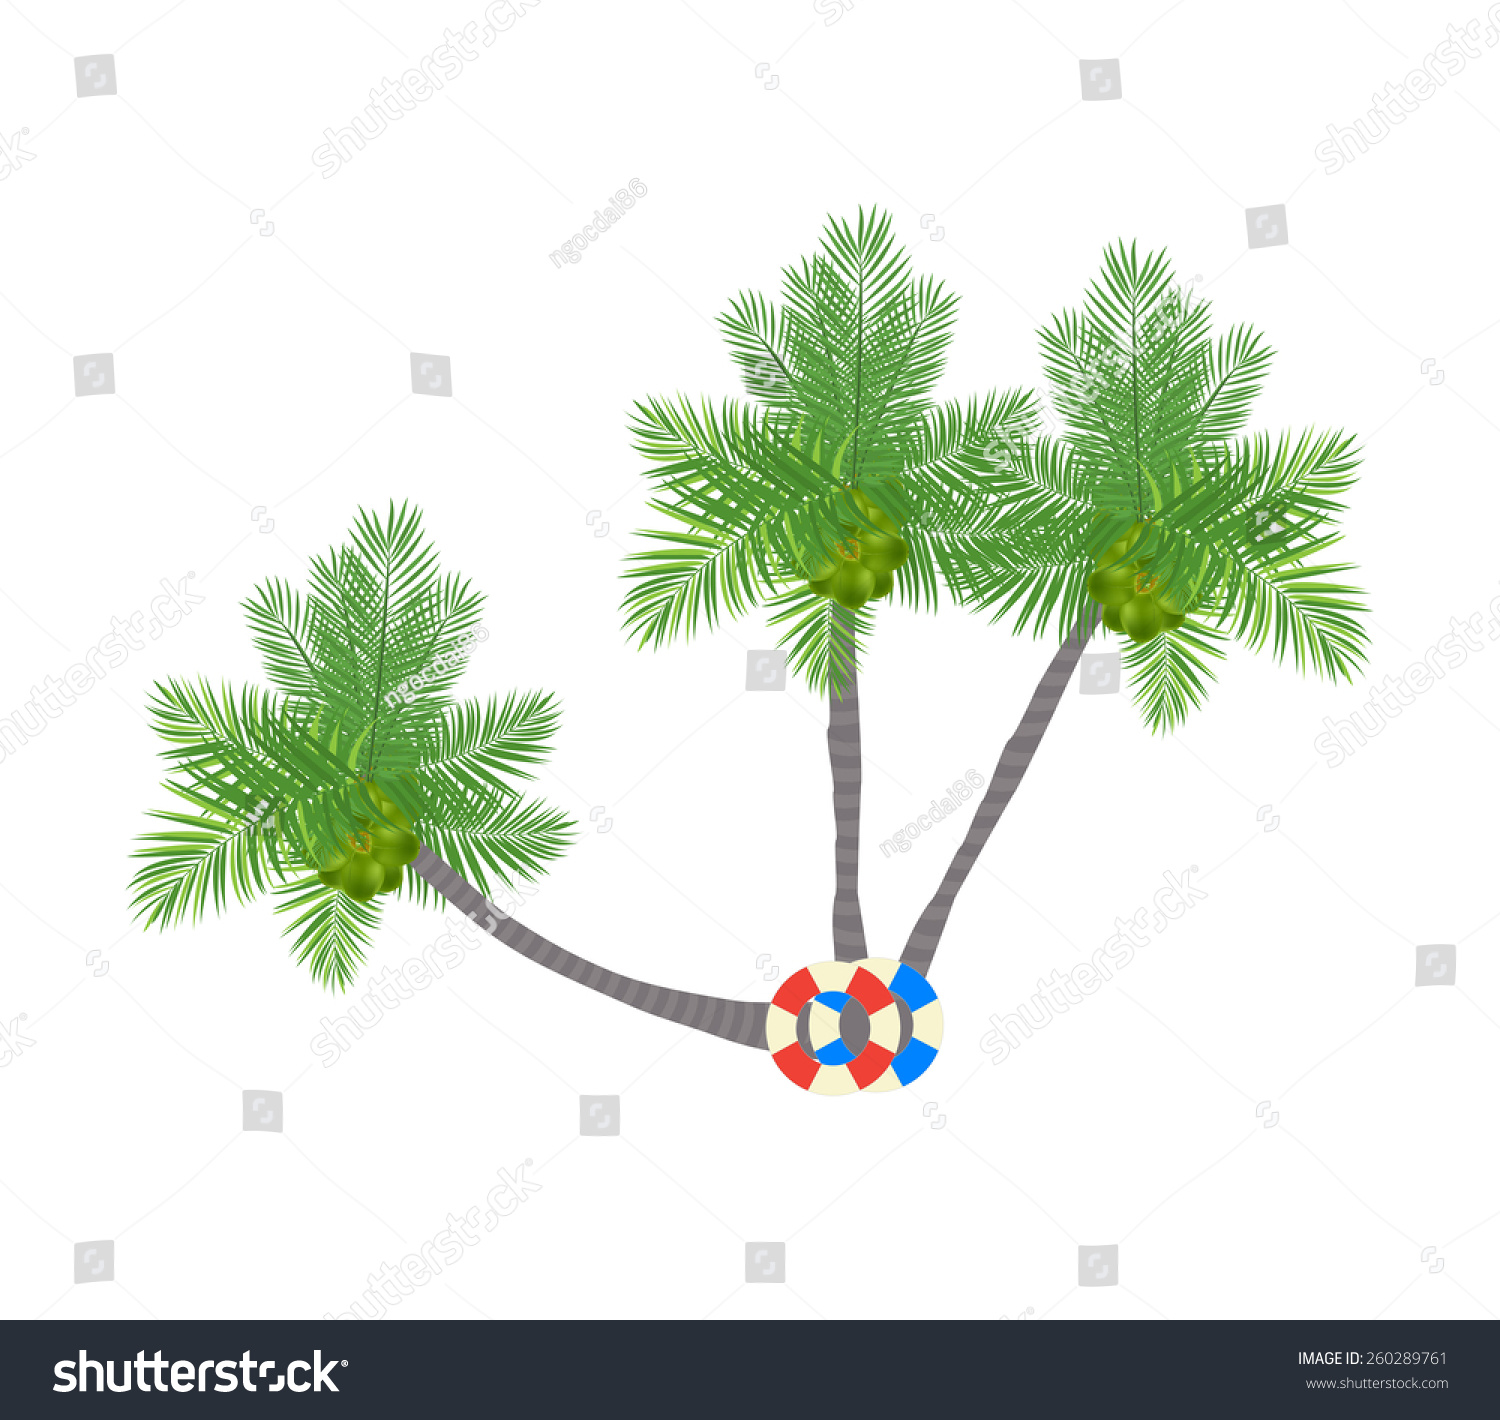 Palm Trees Collection Stock Vector Illustration 260289761 : Shutterstock